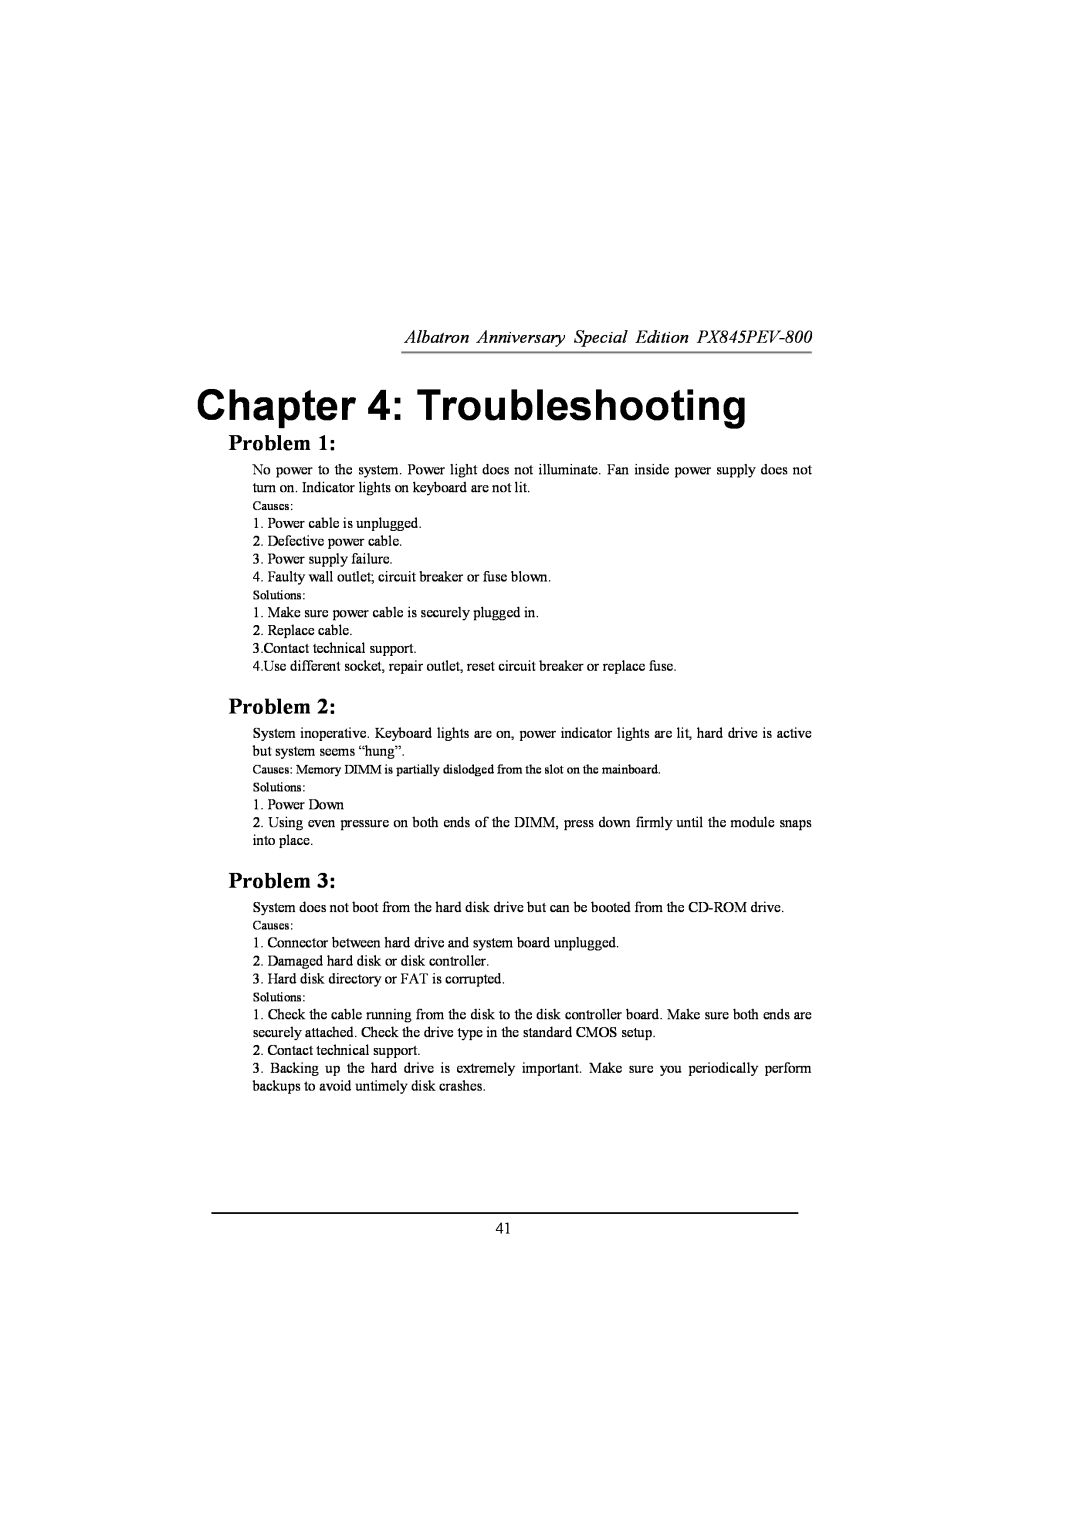 Albatron Technology manual Troubleshooting, Problem, Albatron Anniversary Special Edition PX845PEV-800 